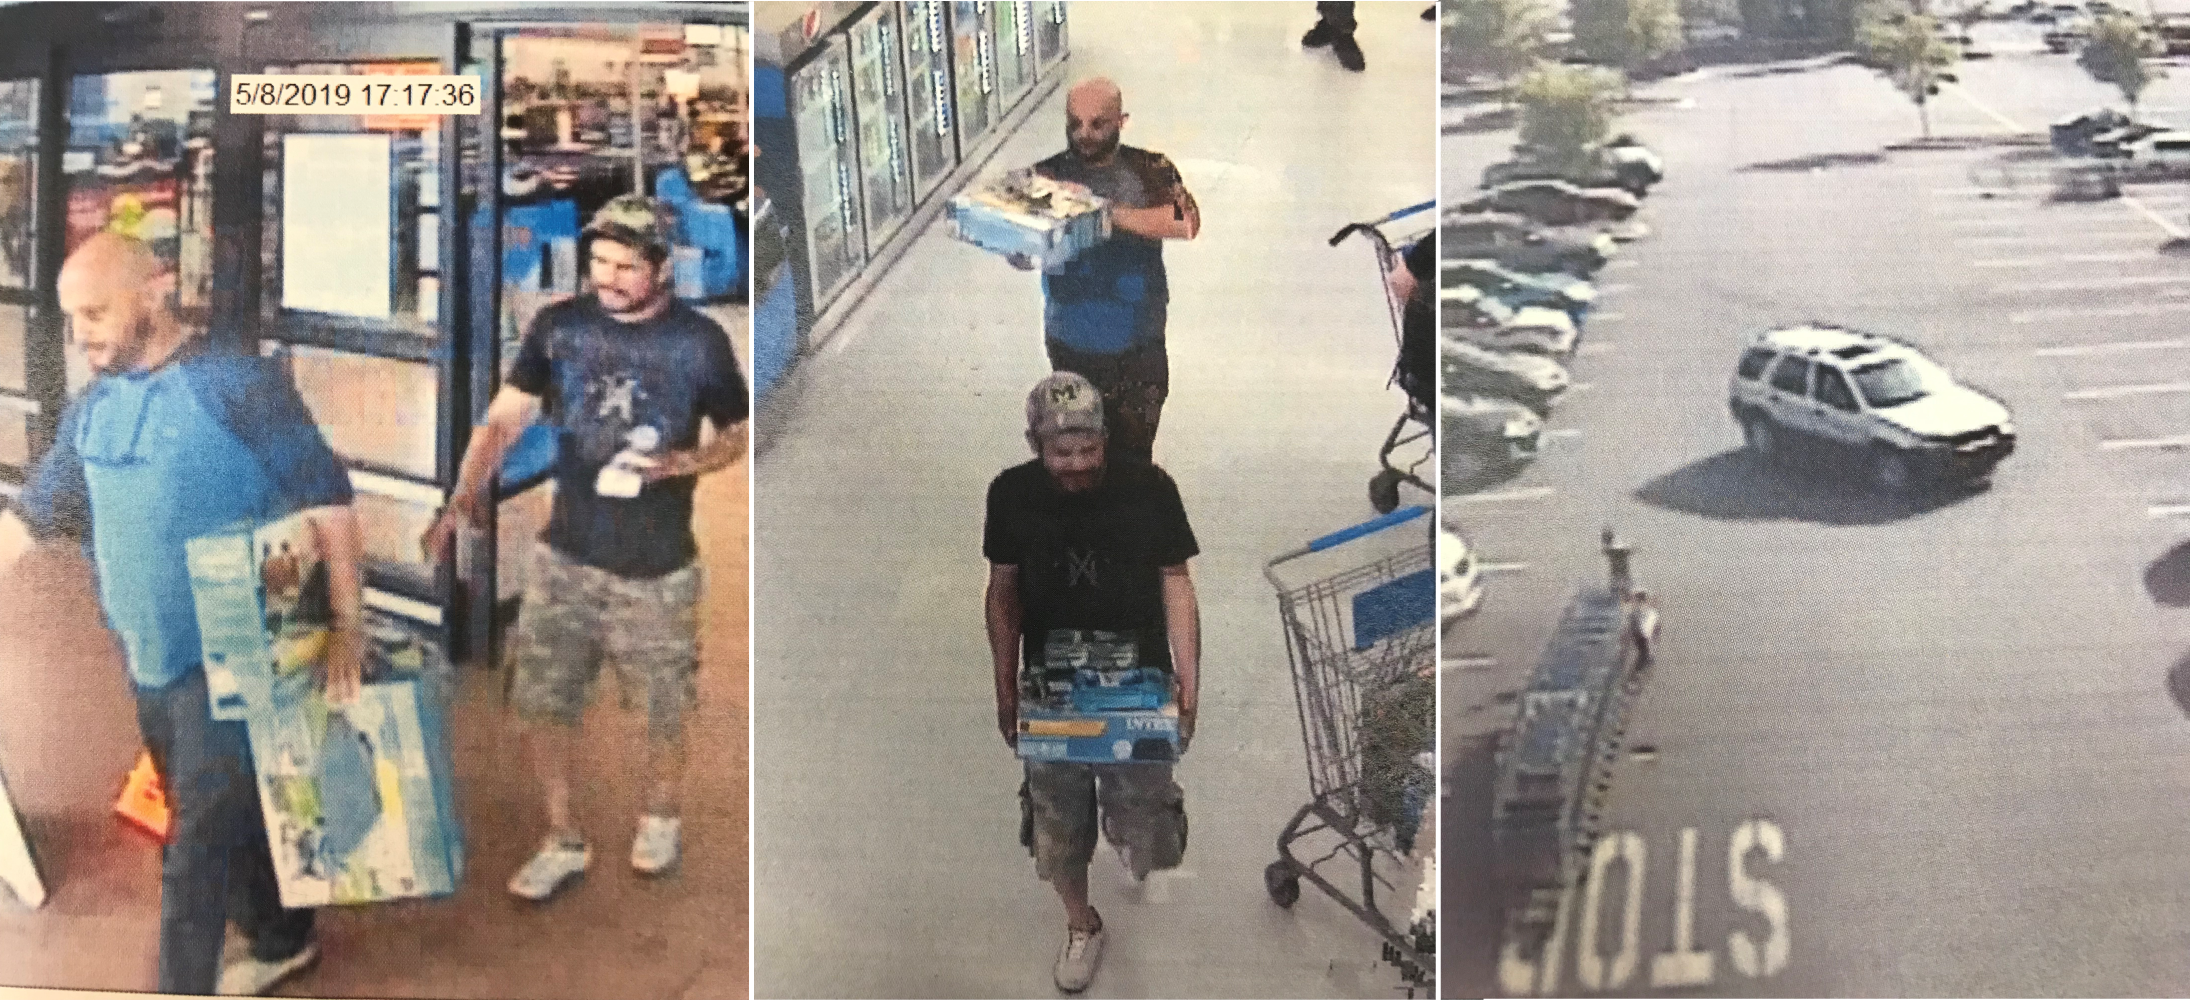 Crime of the Week 5/13/2019